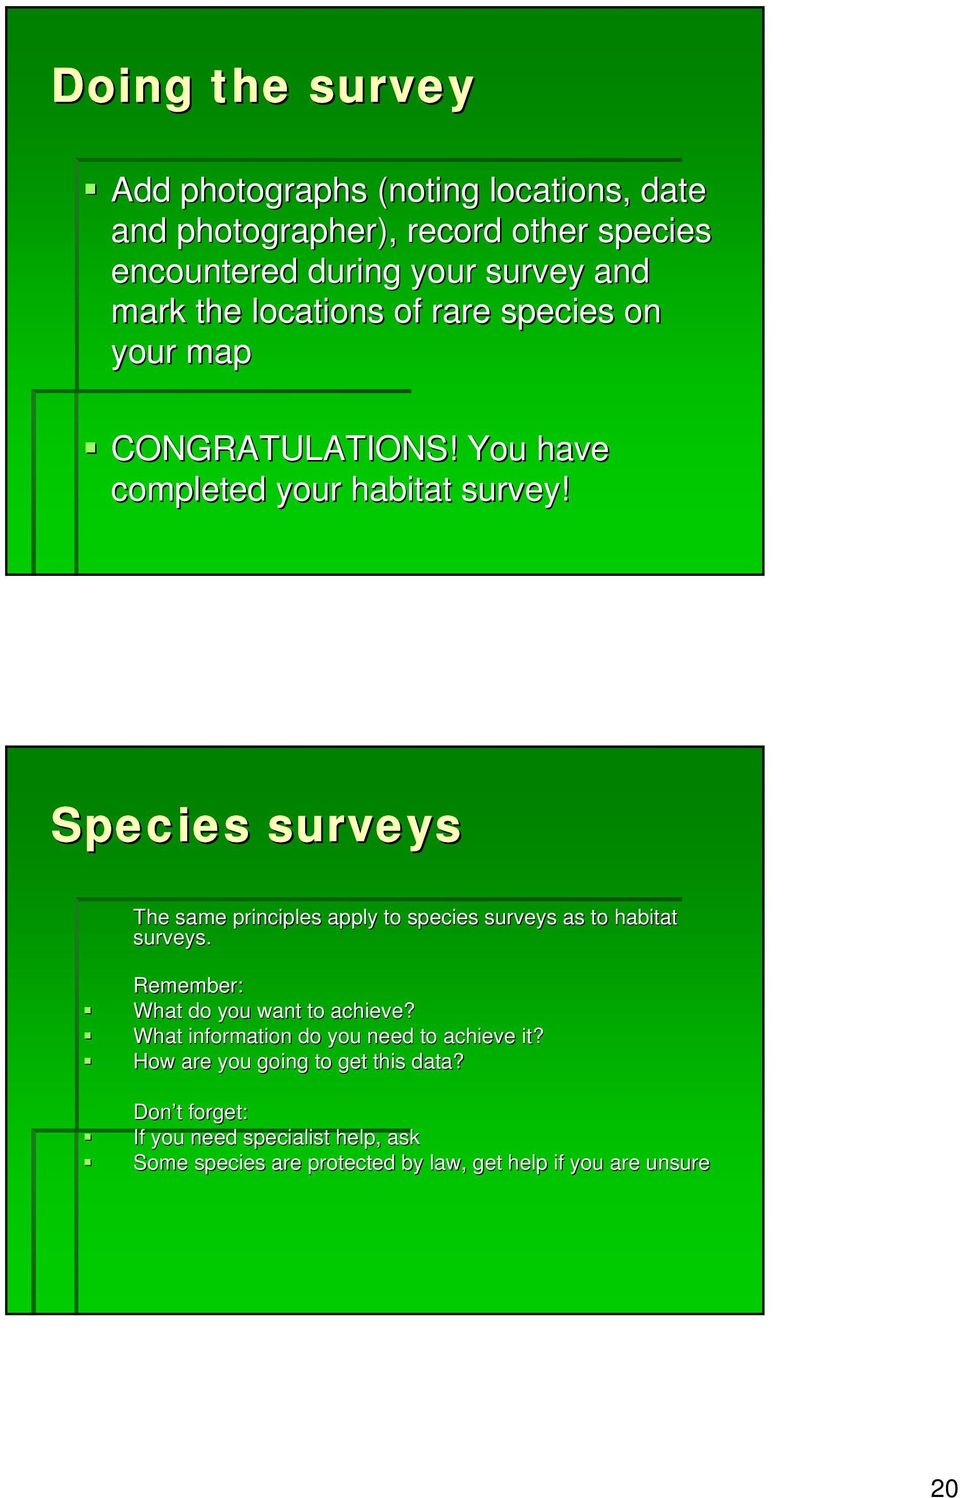 Species surveys The same principles apply to species surveys as to habitat surveys. Remember: What do you want to achieve?